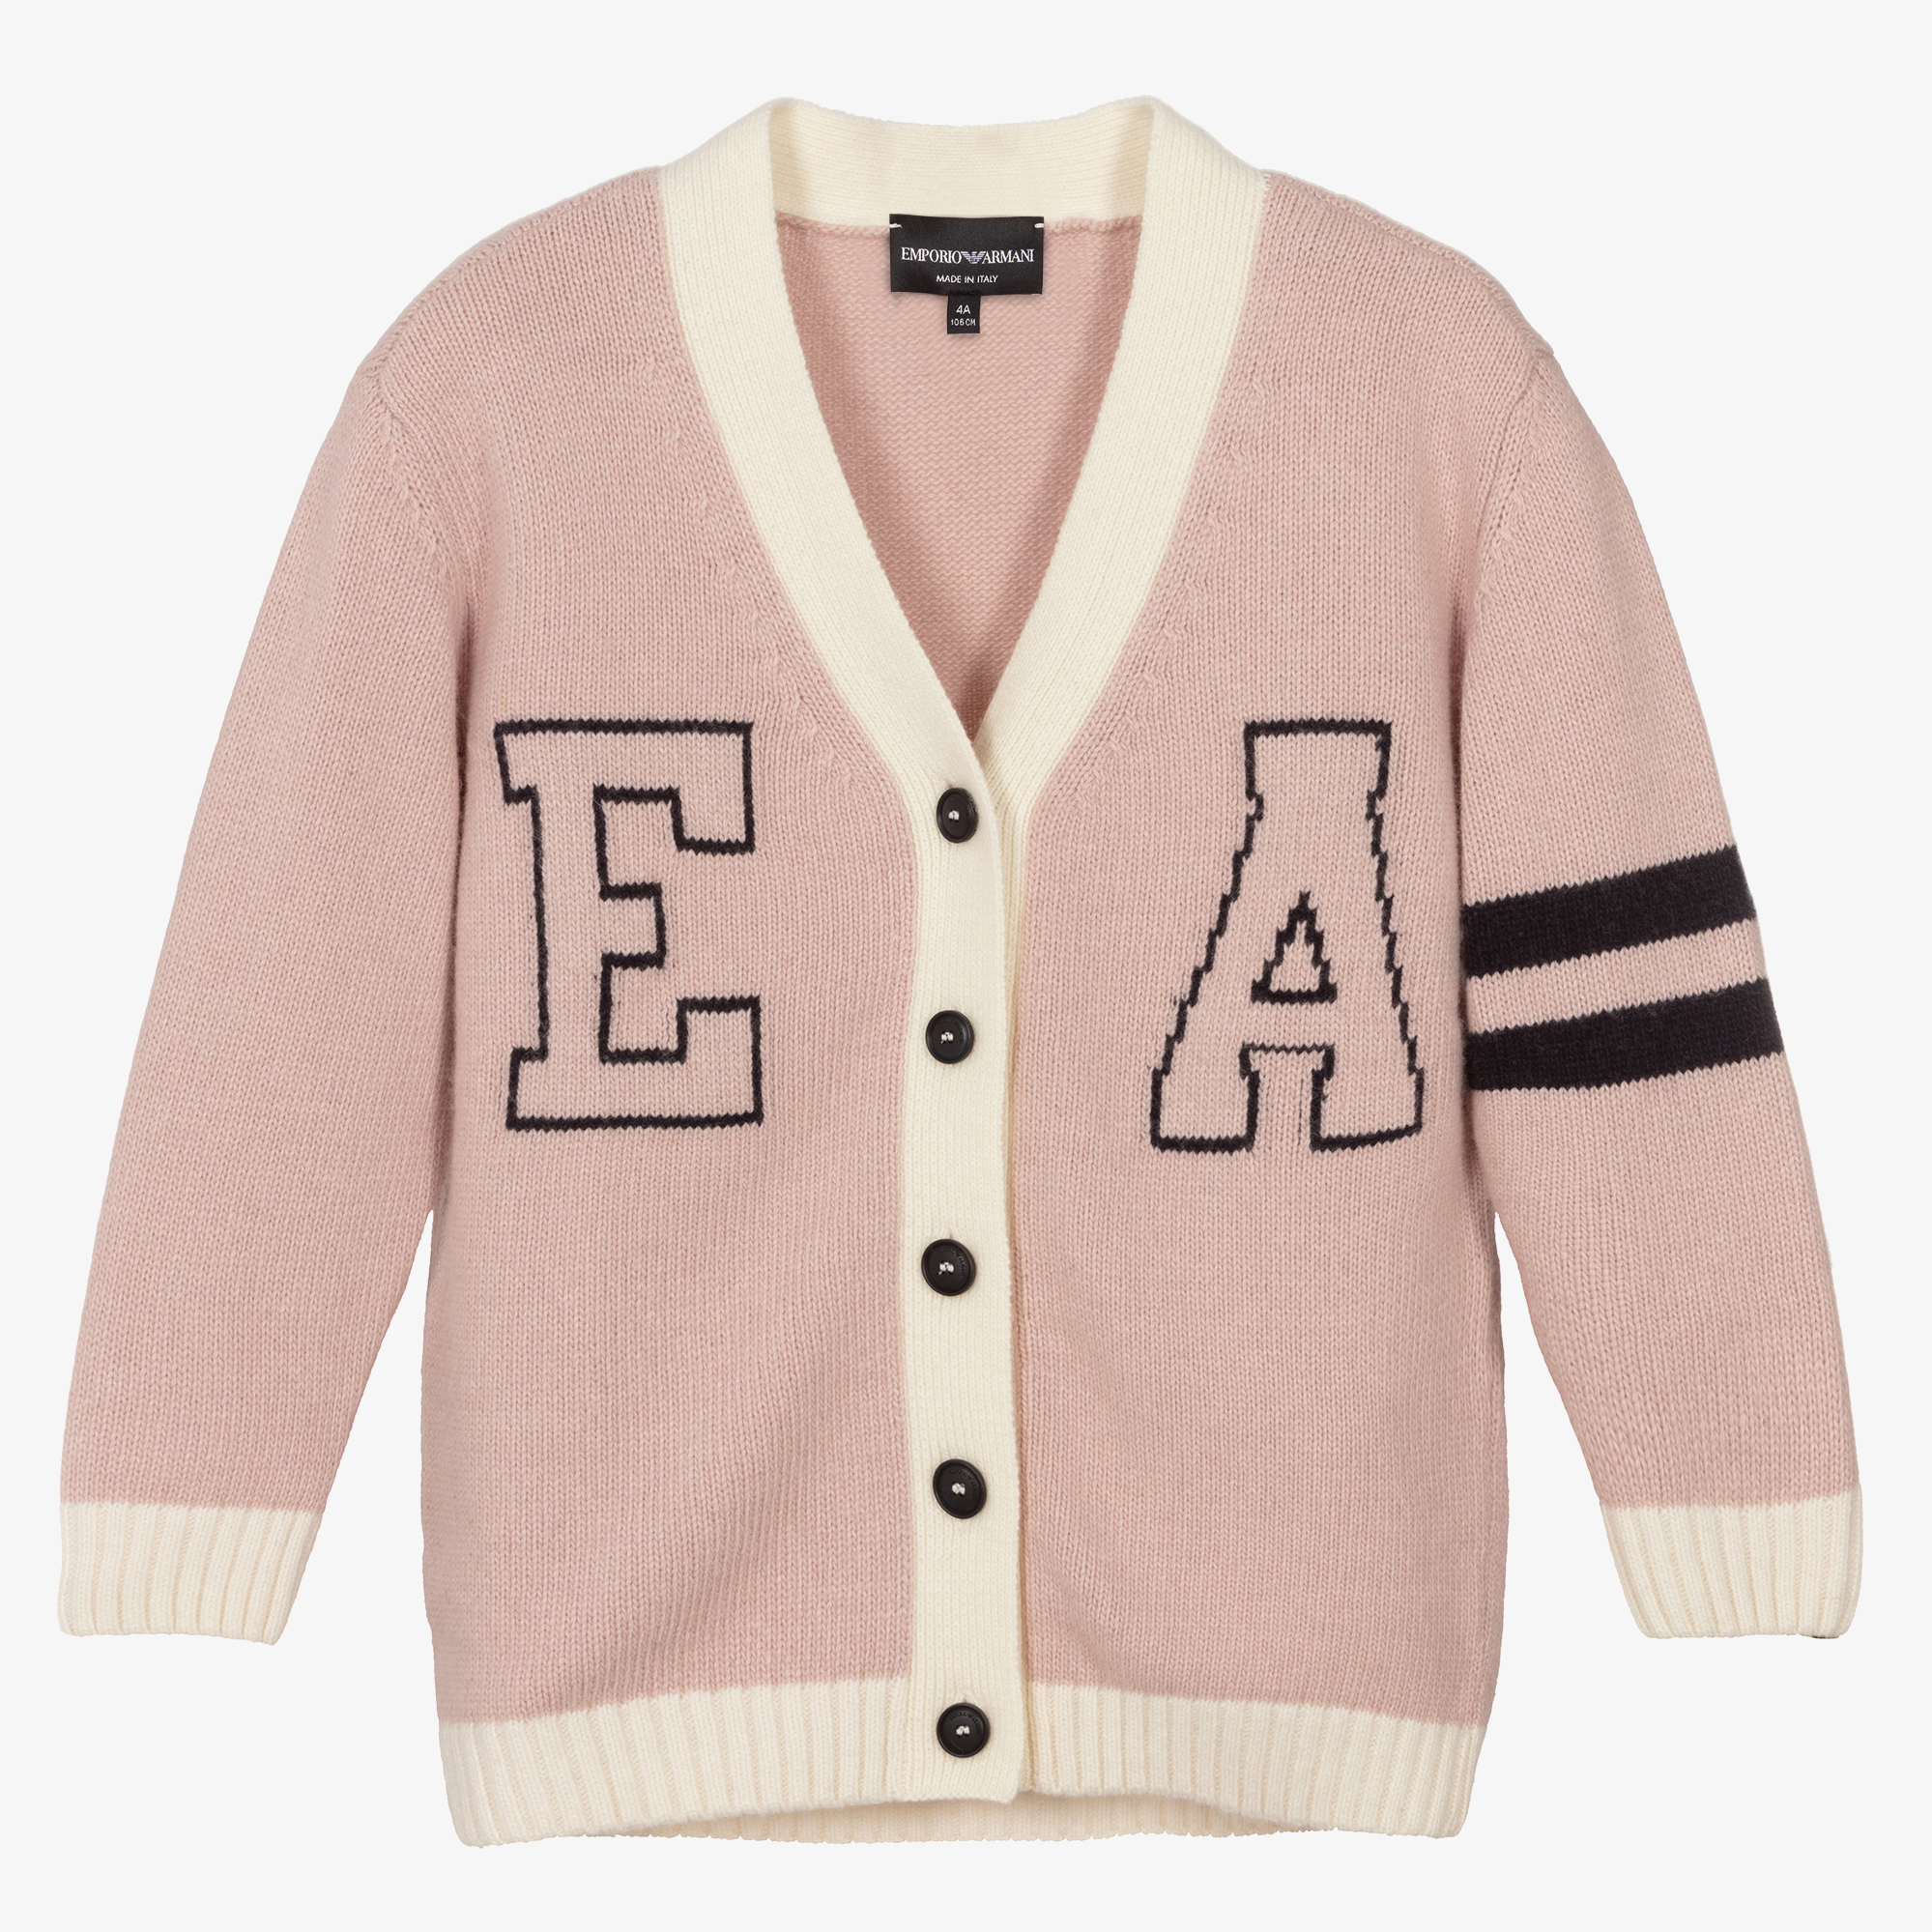 made in italy pink knit cardigan.